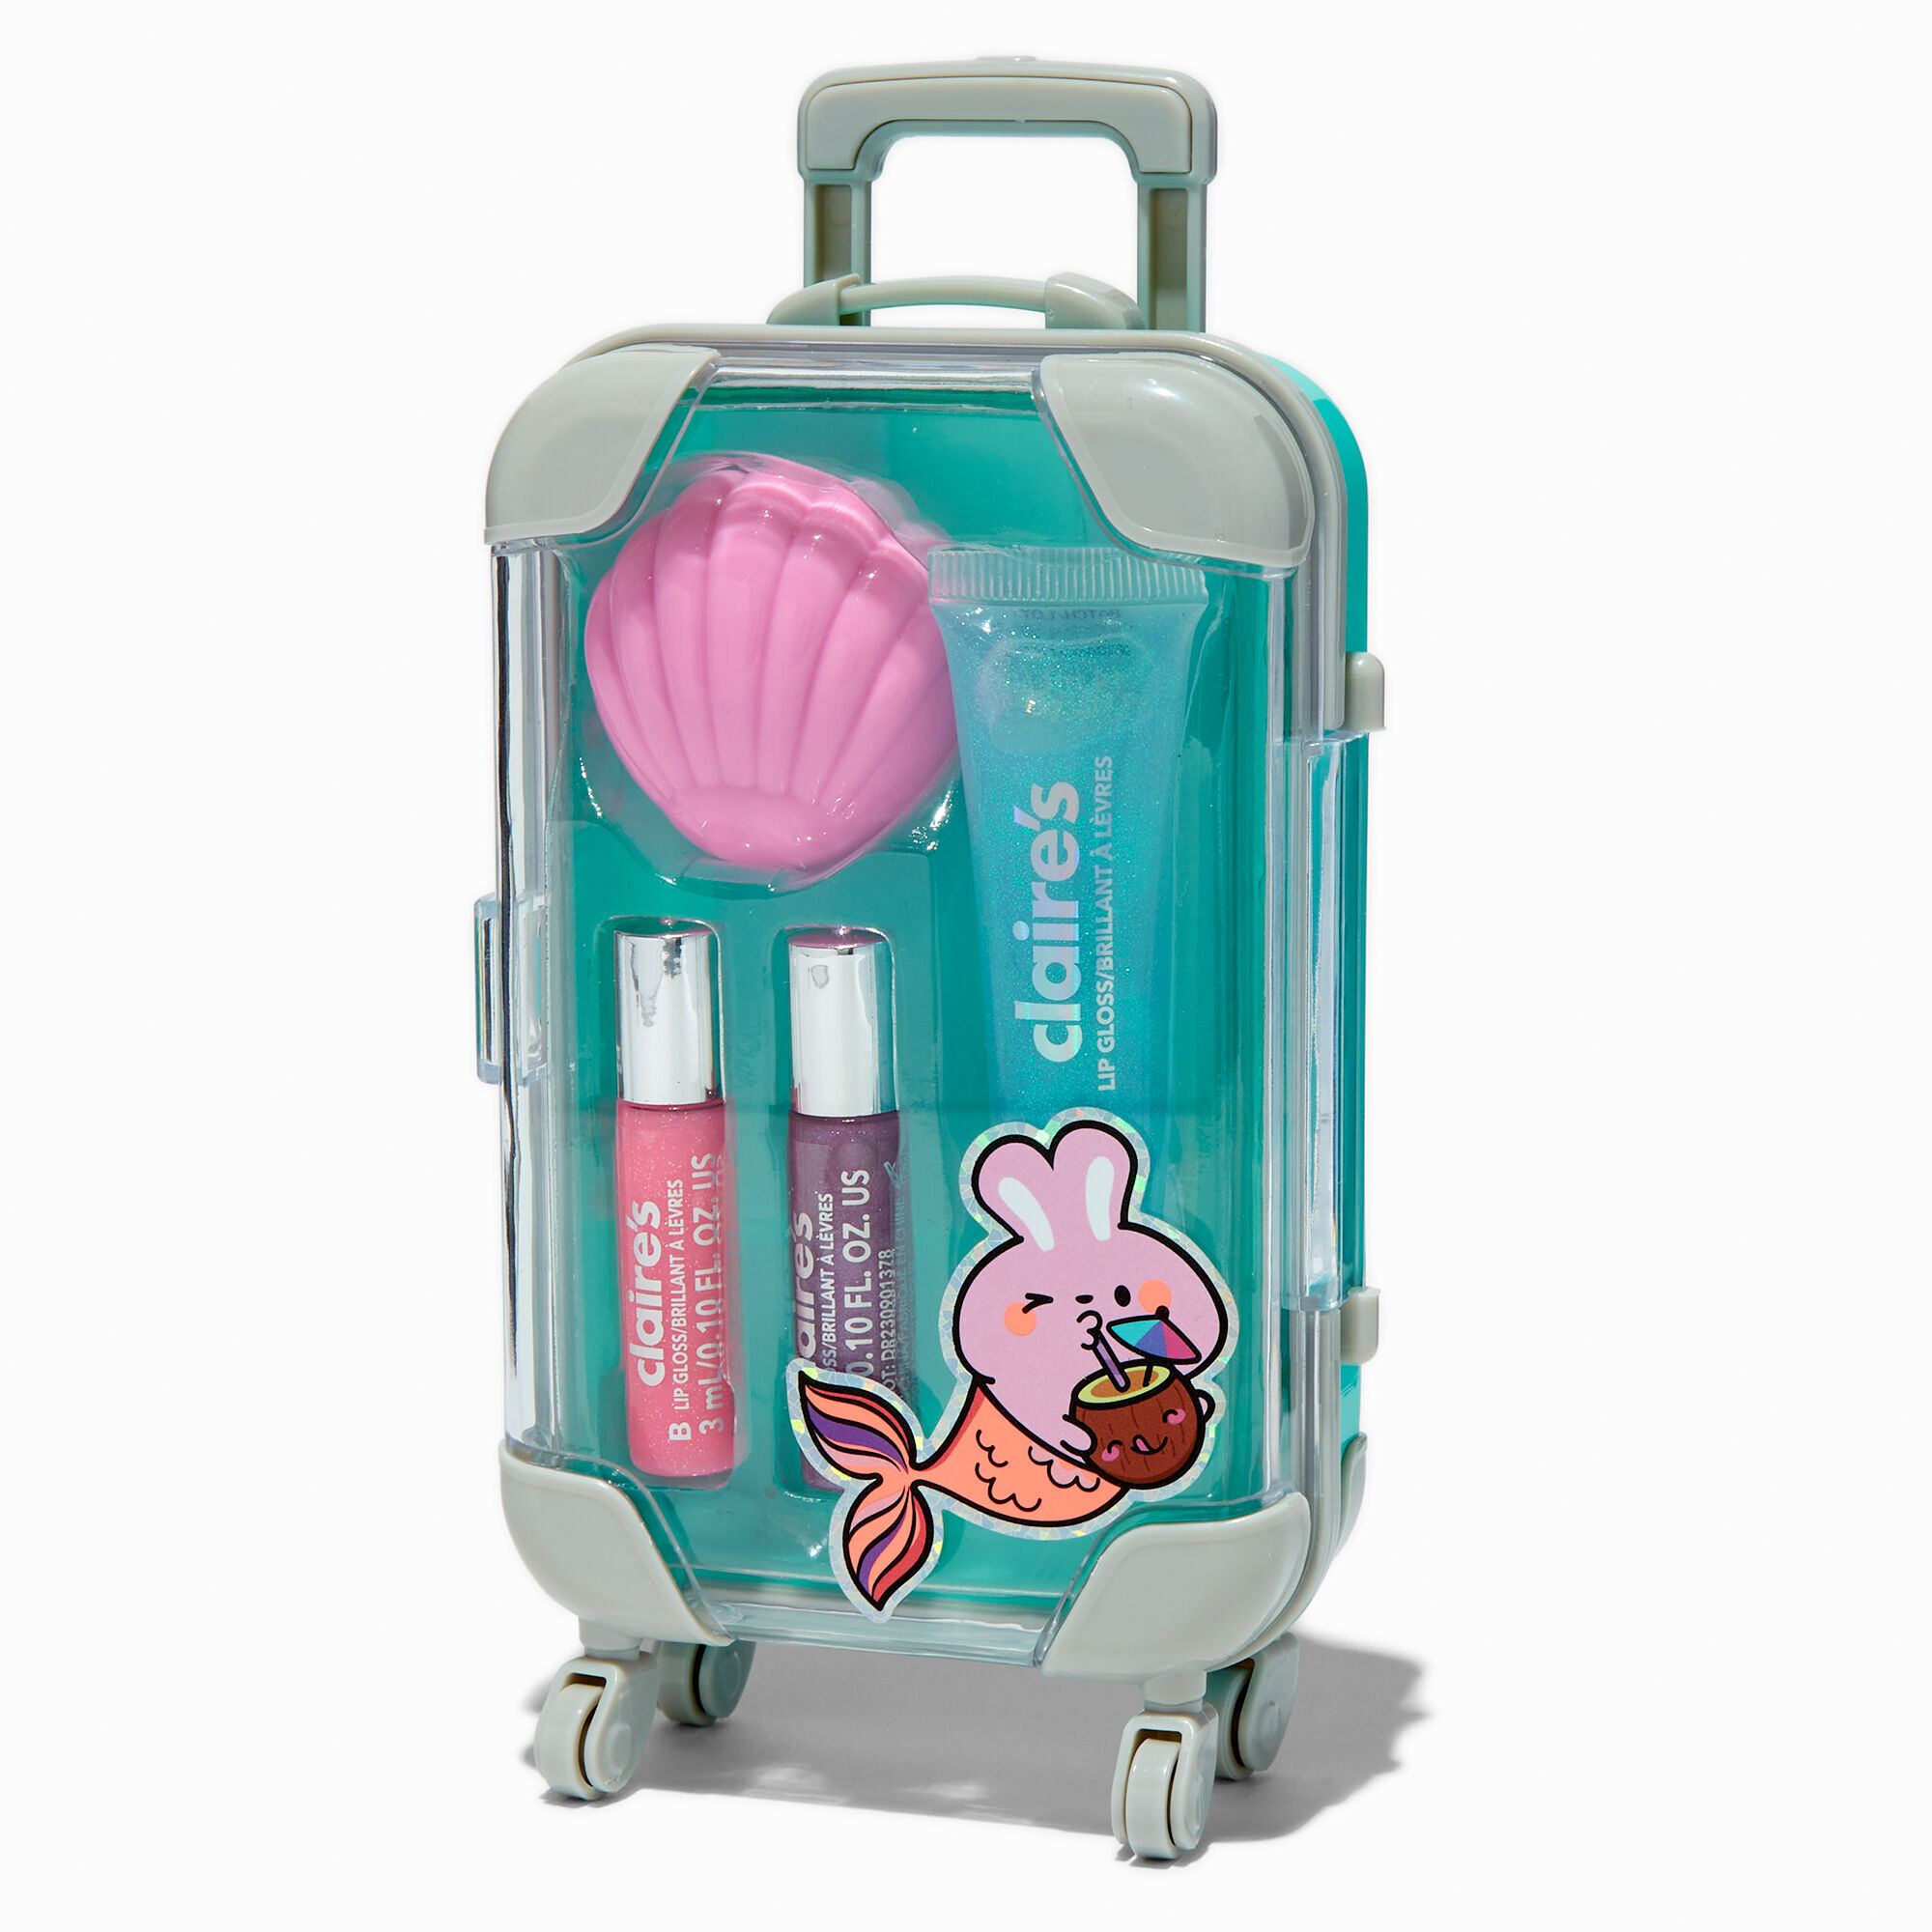 Claire's Mermaid Critter Luggage Lip Gloss Set